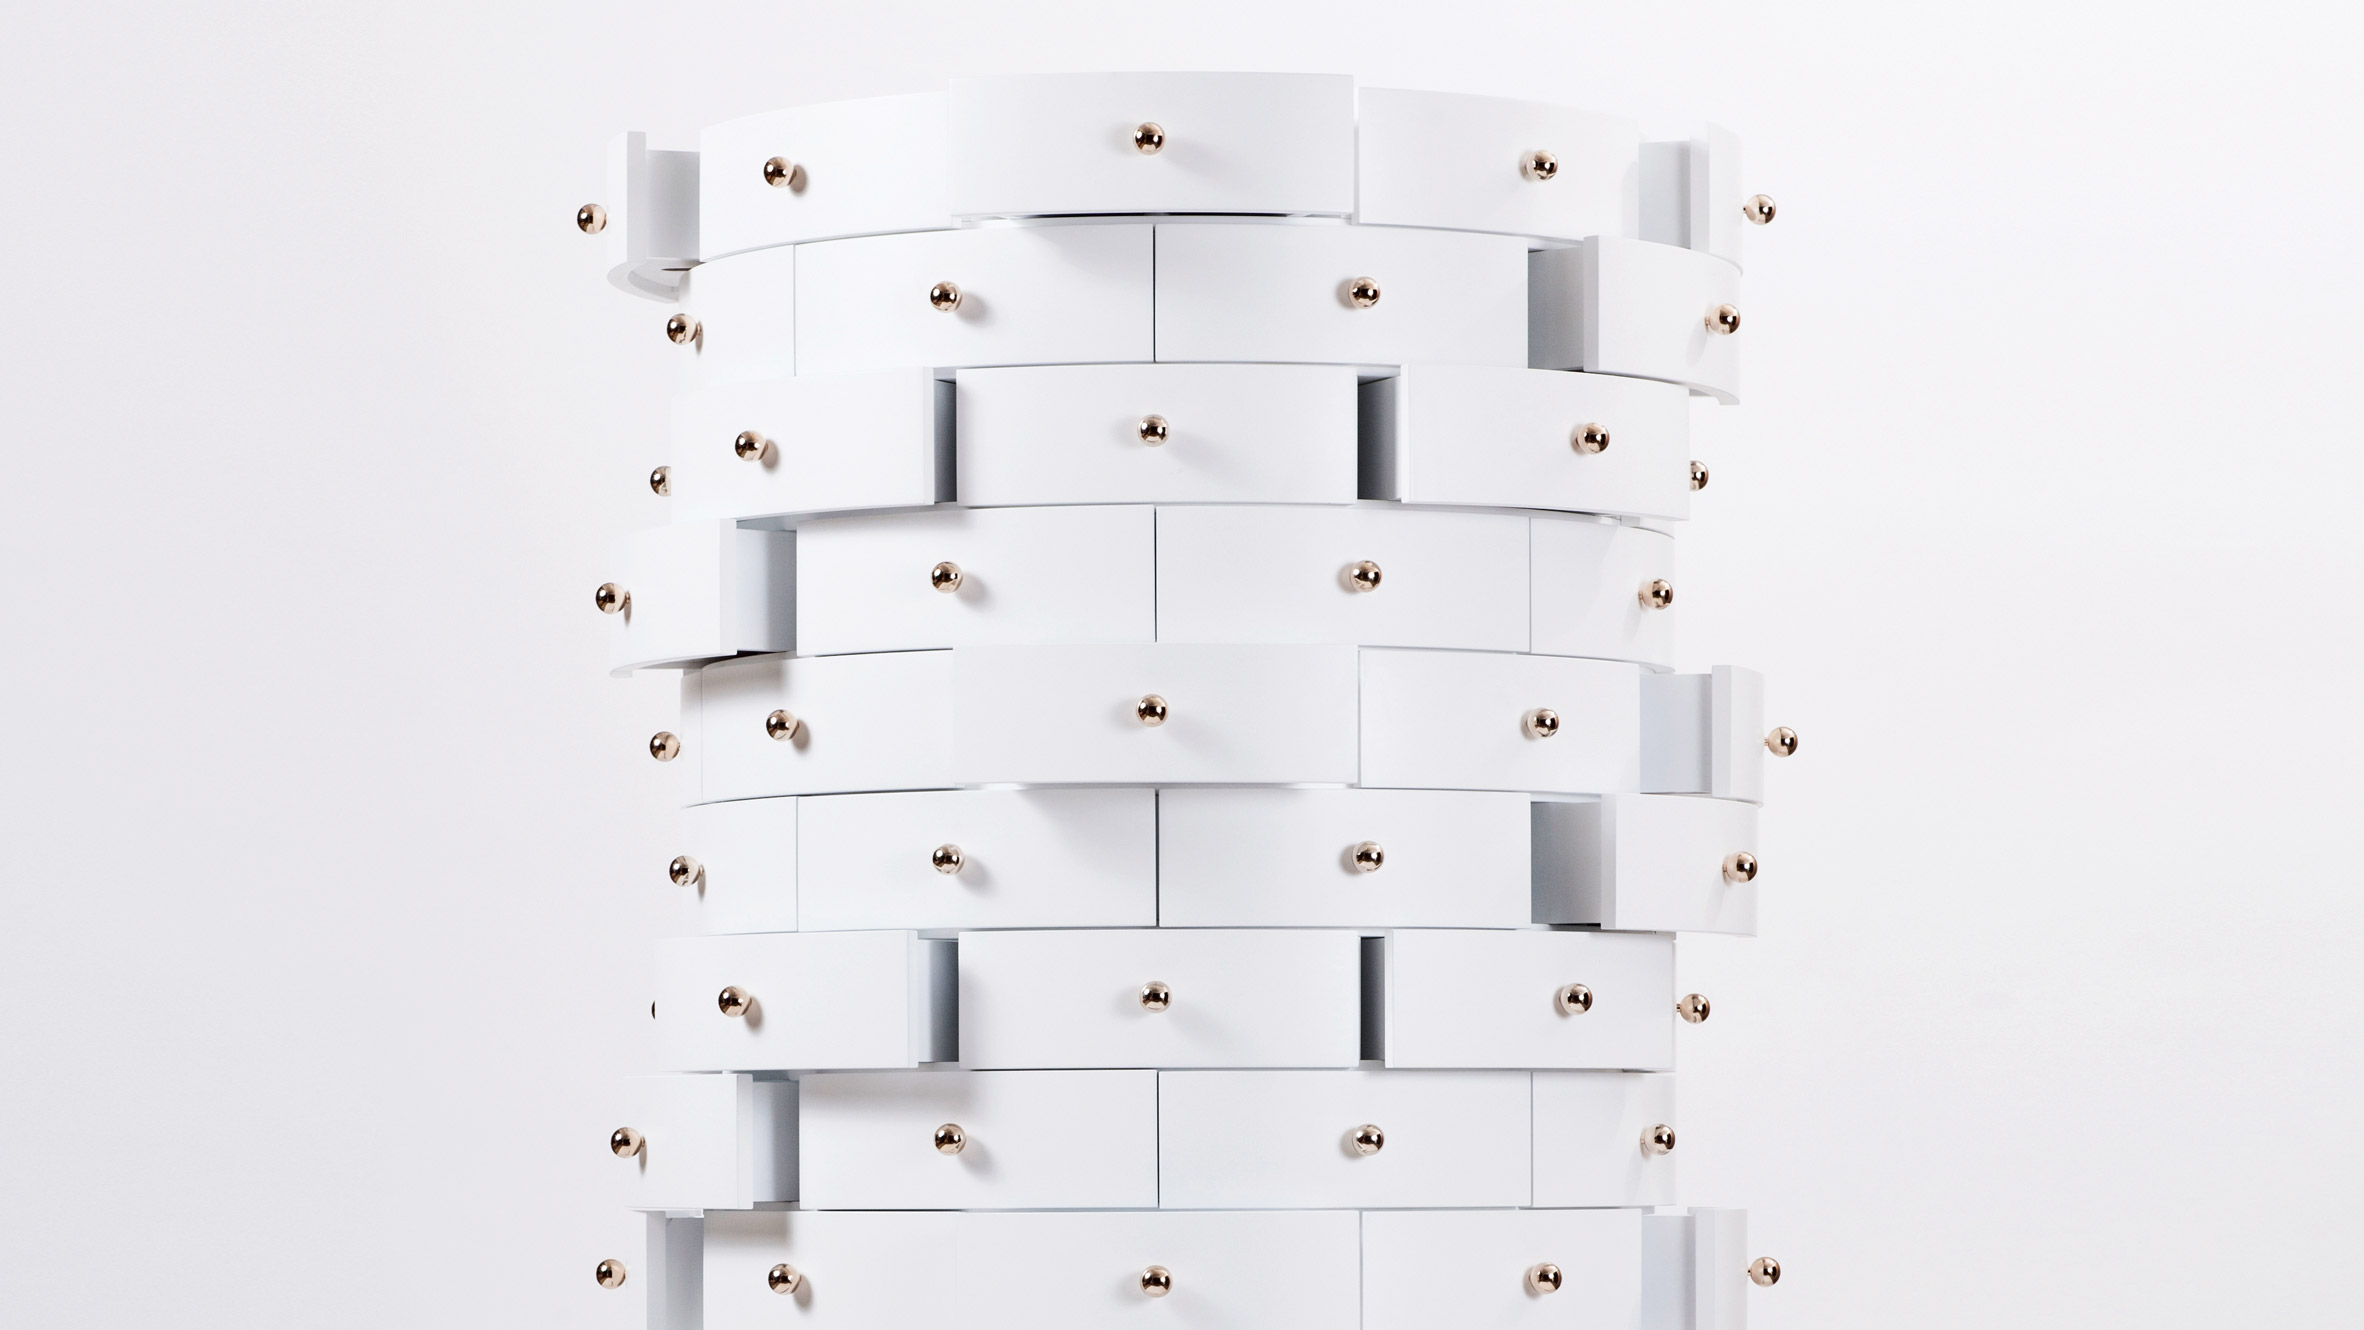 Rianne Koens' stackable boxes function as cabinets and tables